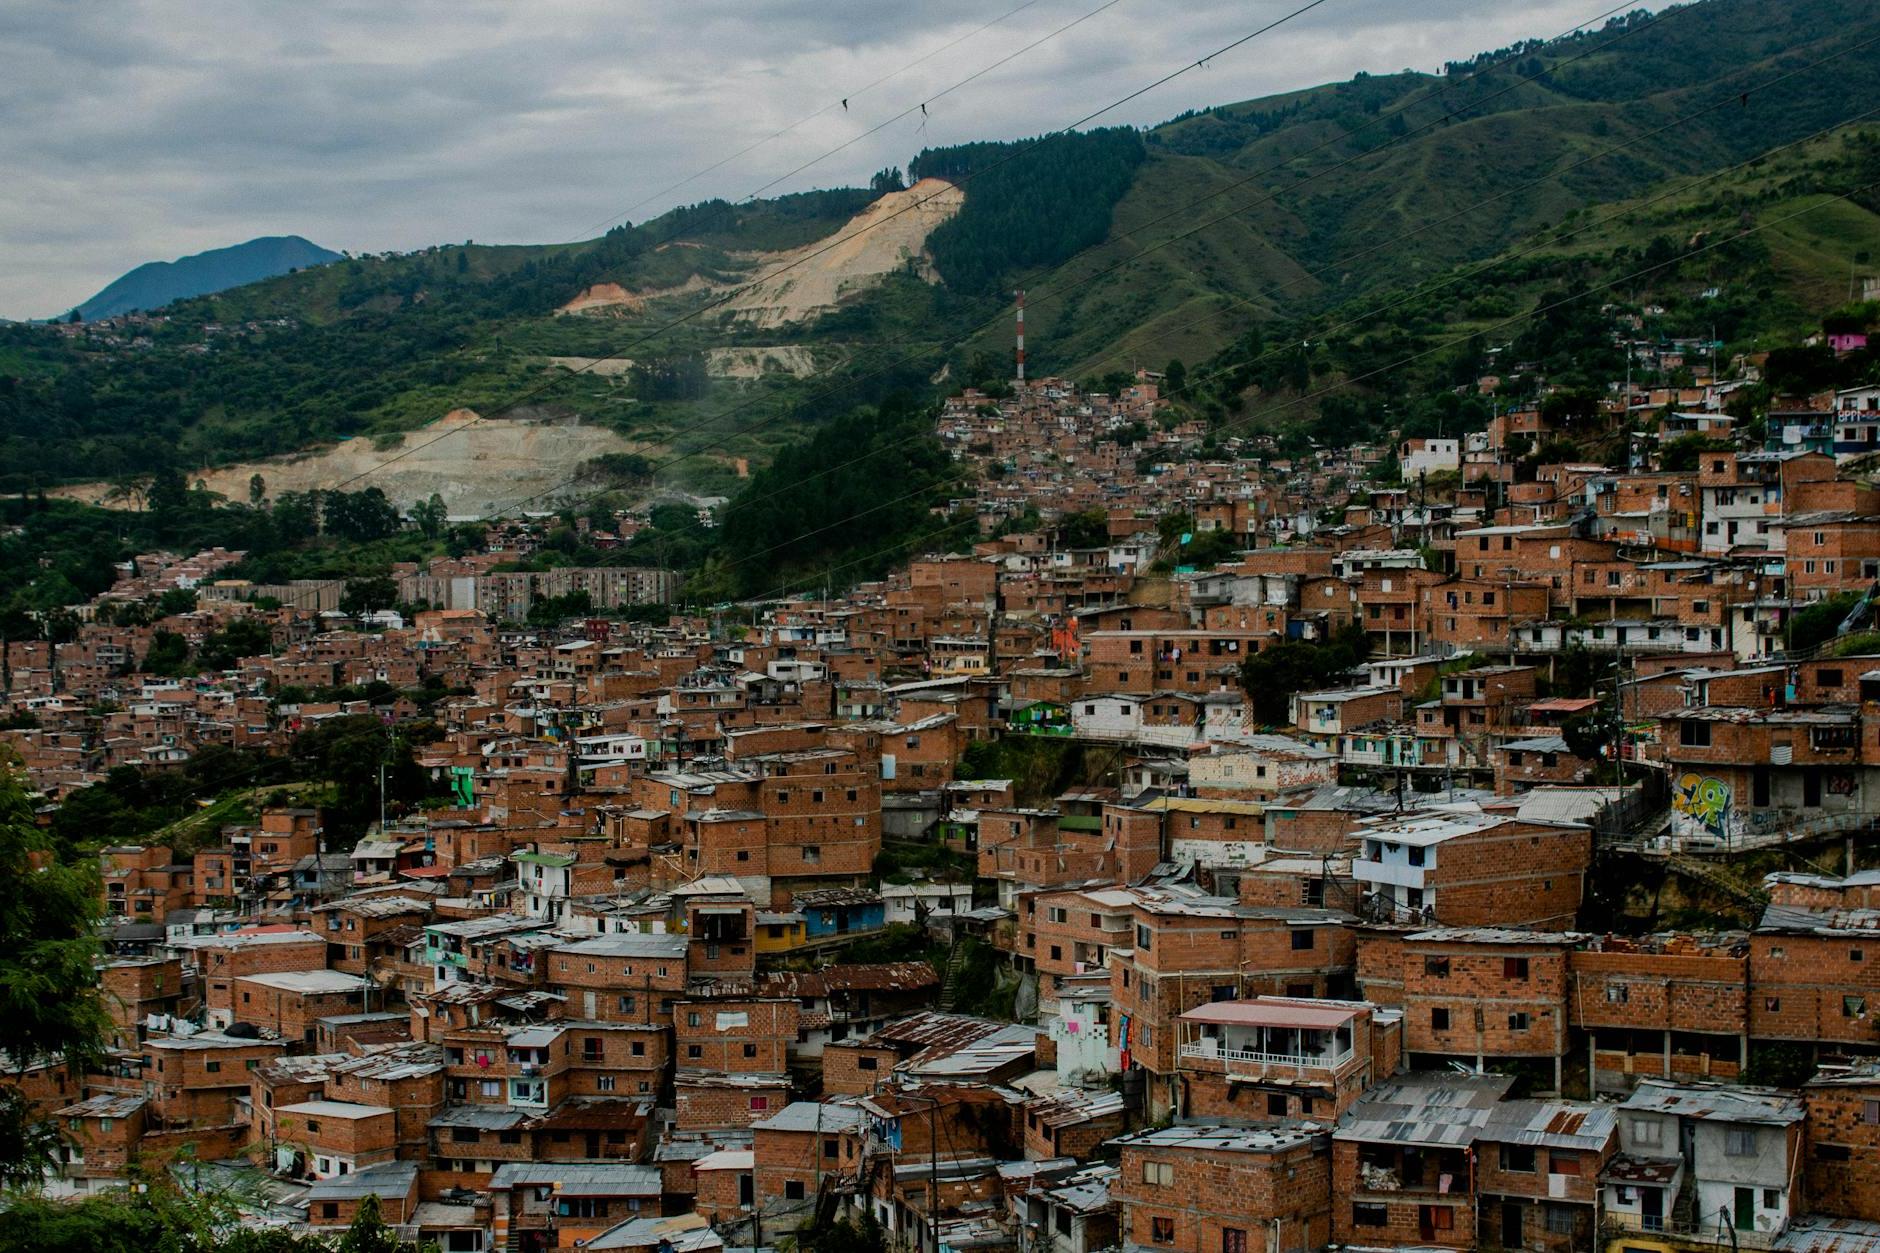 Panoramic View of the District Comuna 13 in Medellin, Colombia